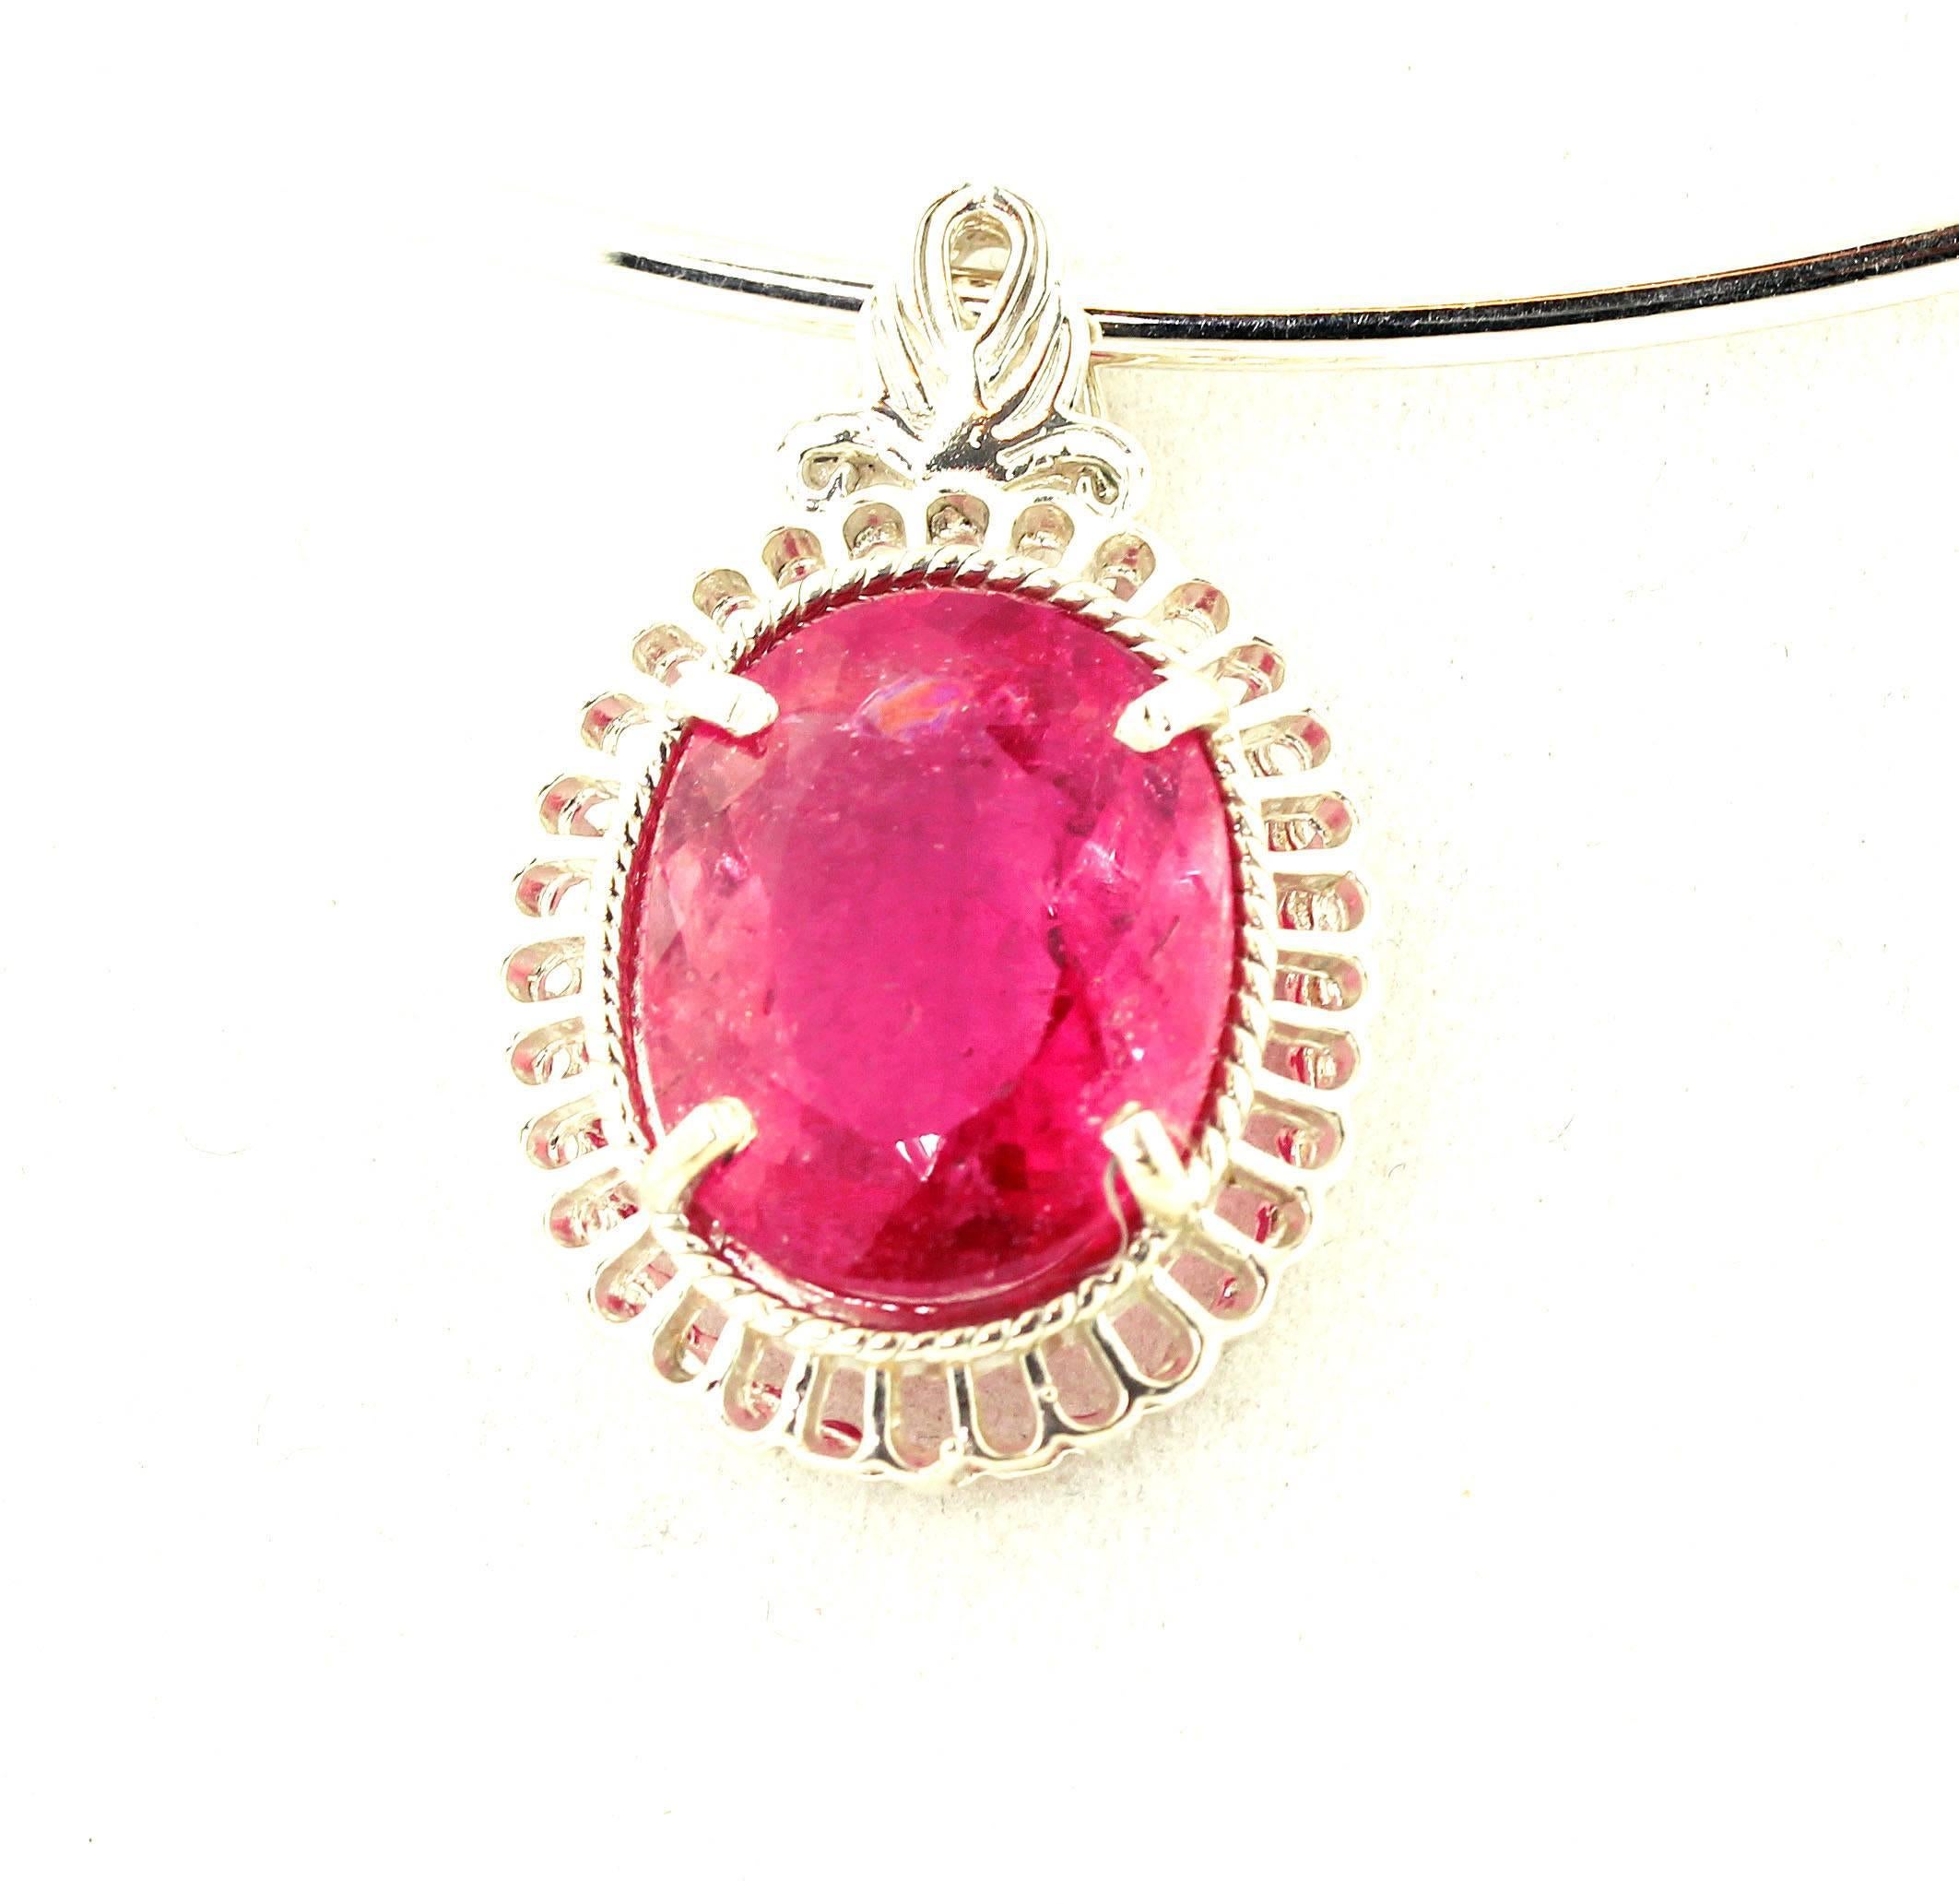 Oval Cut AJD Absolutely Stunning 15 Ct Unique Tourmaline Sterling Silver Pendant For Sale